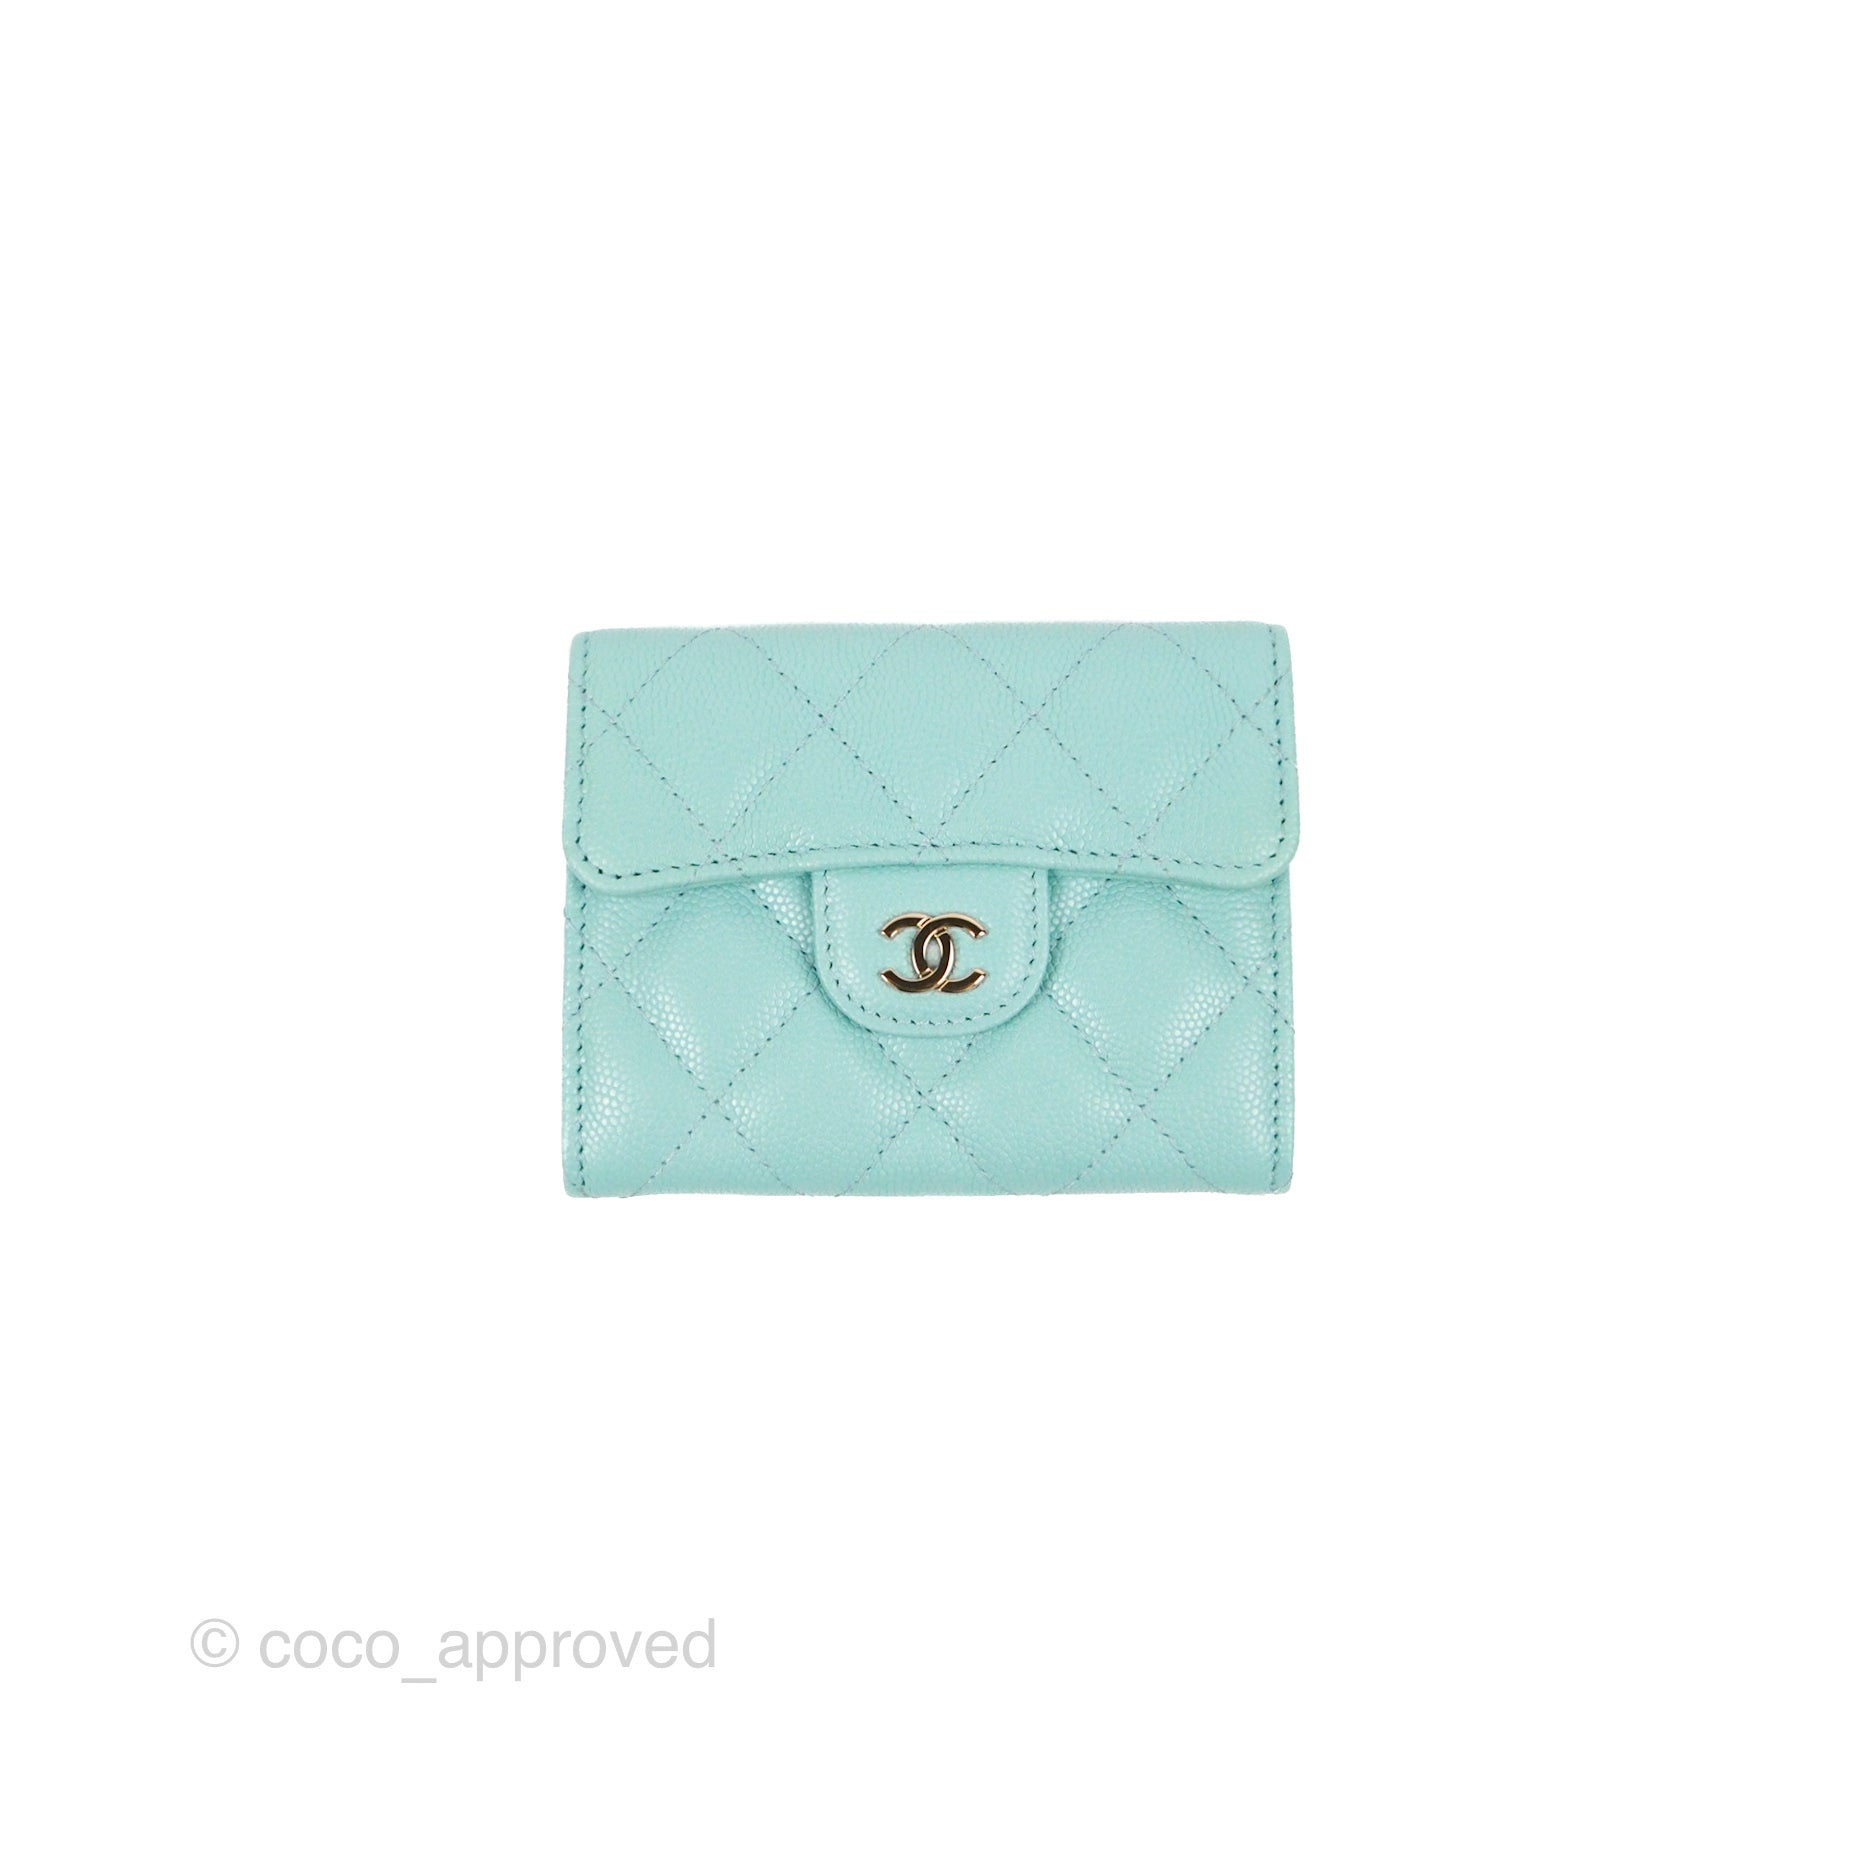 Chanel Card Holder: Chic Alternative to the Chanel Wallet on Chain, Handbags and Accessories